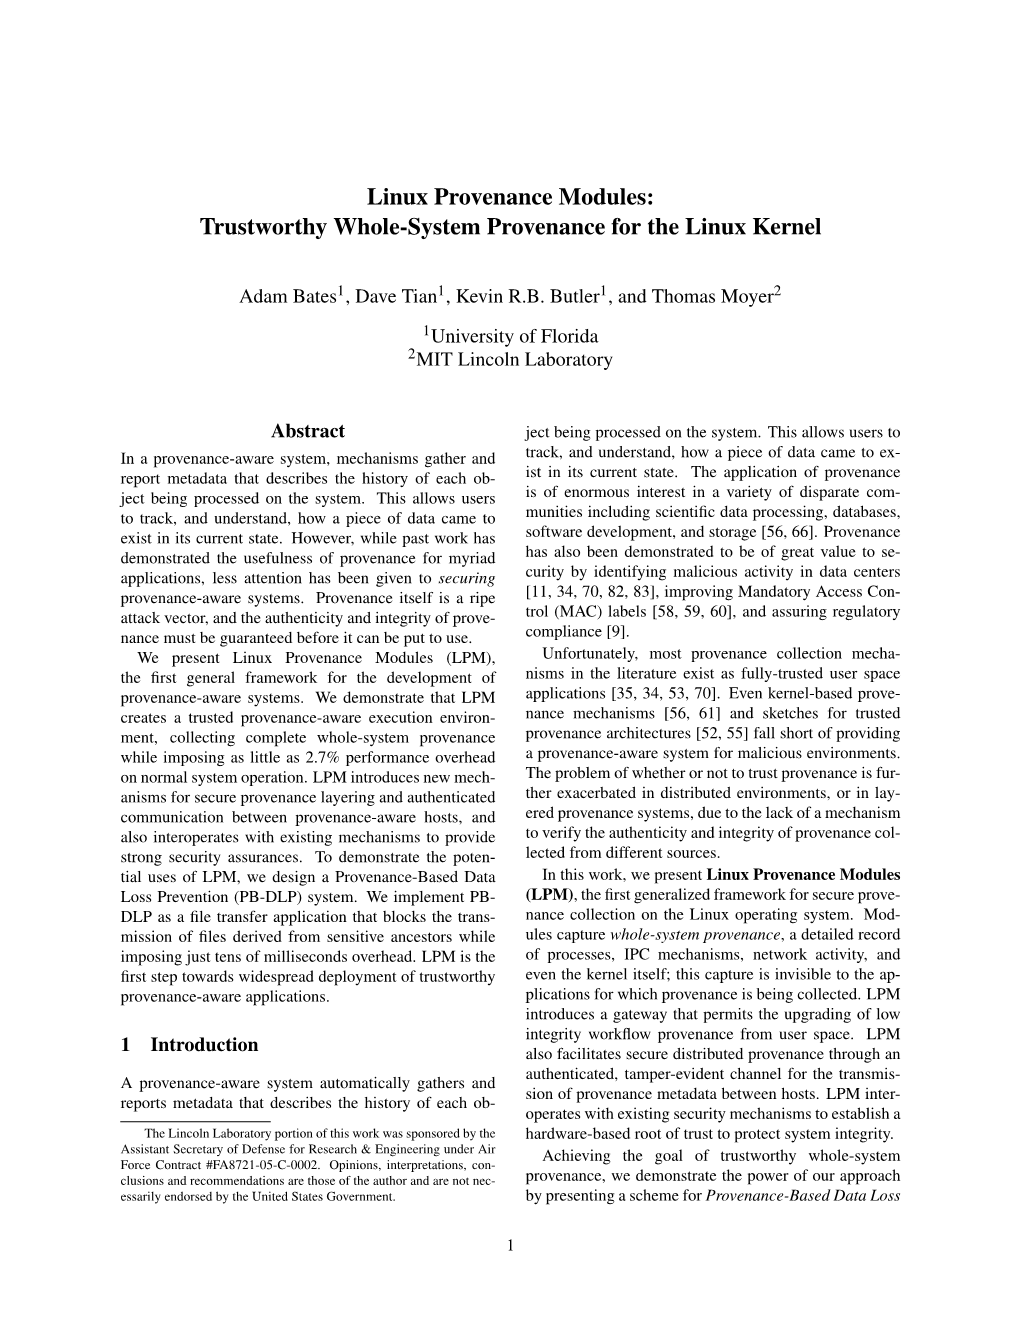 Linux Provenance Modules: Trustworthy Whole-System Provenance for the Linux Kernel